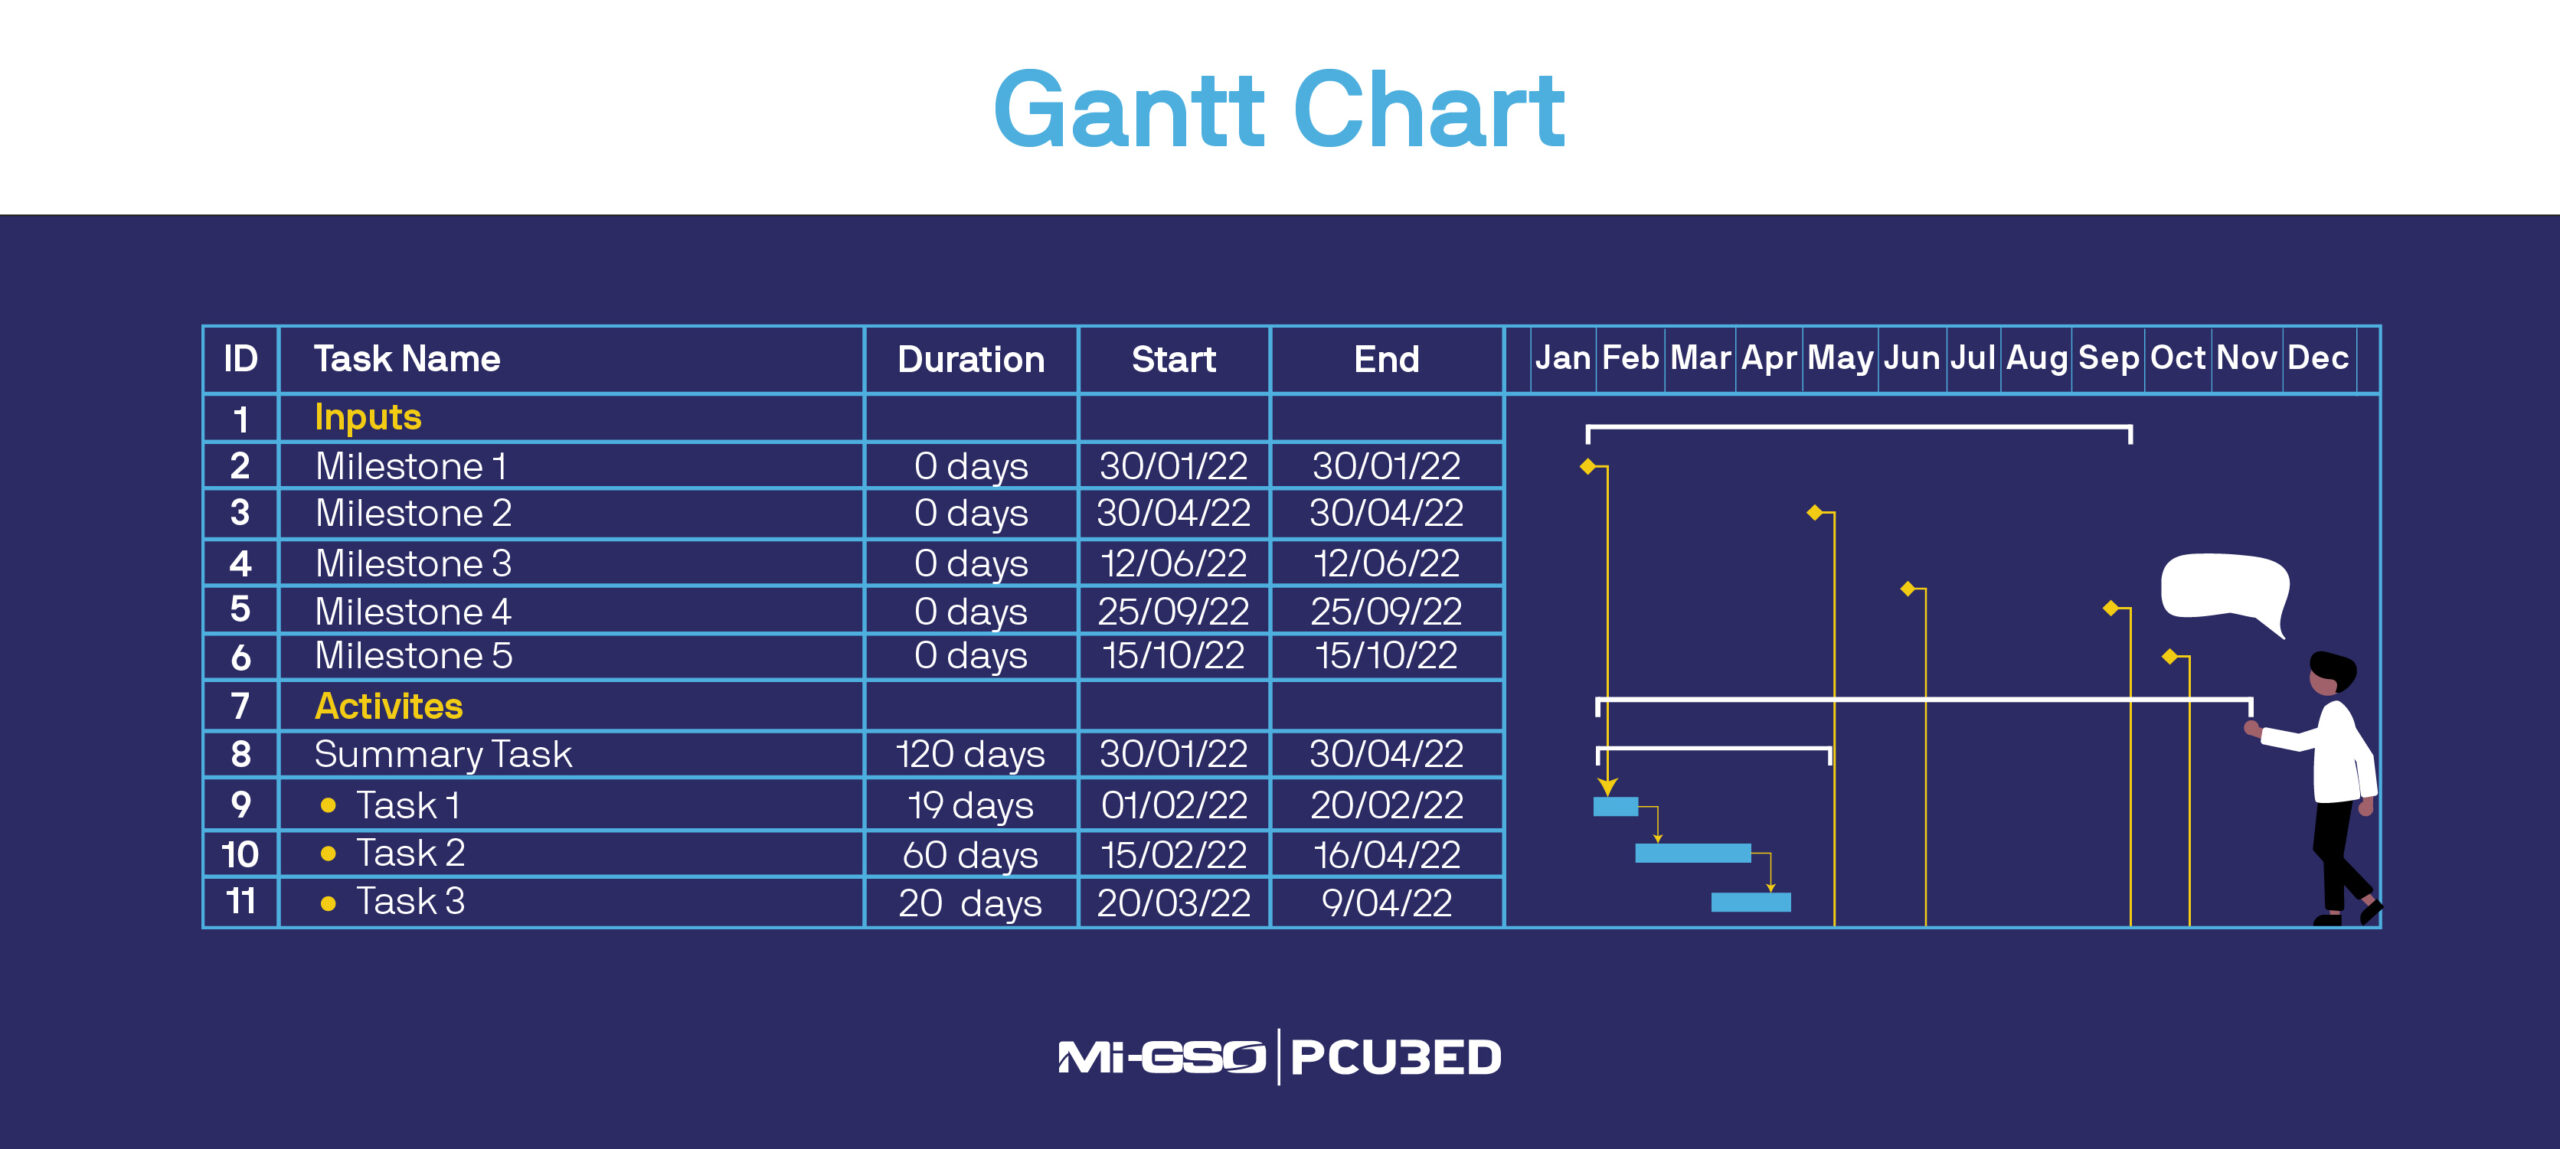 Example of a Gantt chart to manage a project schedule